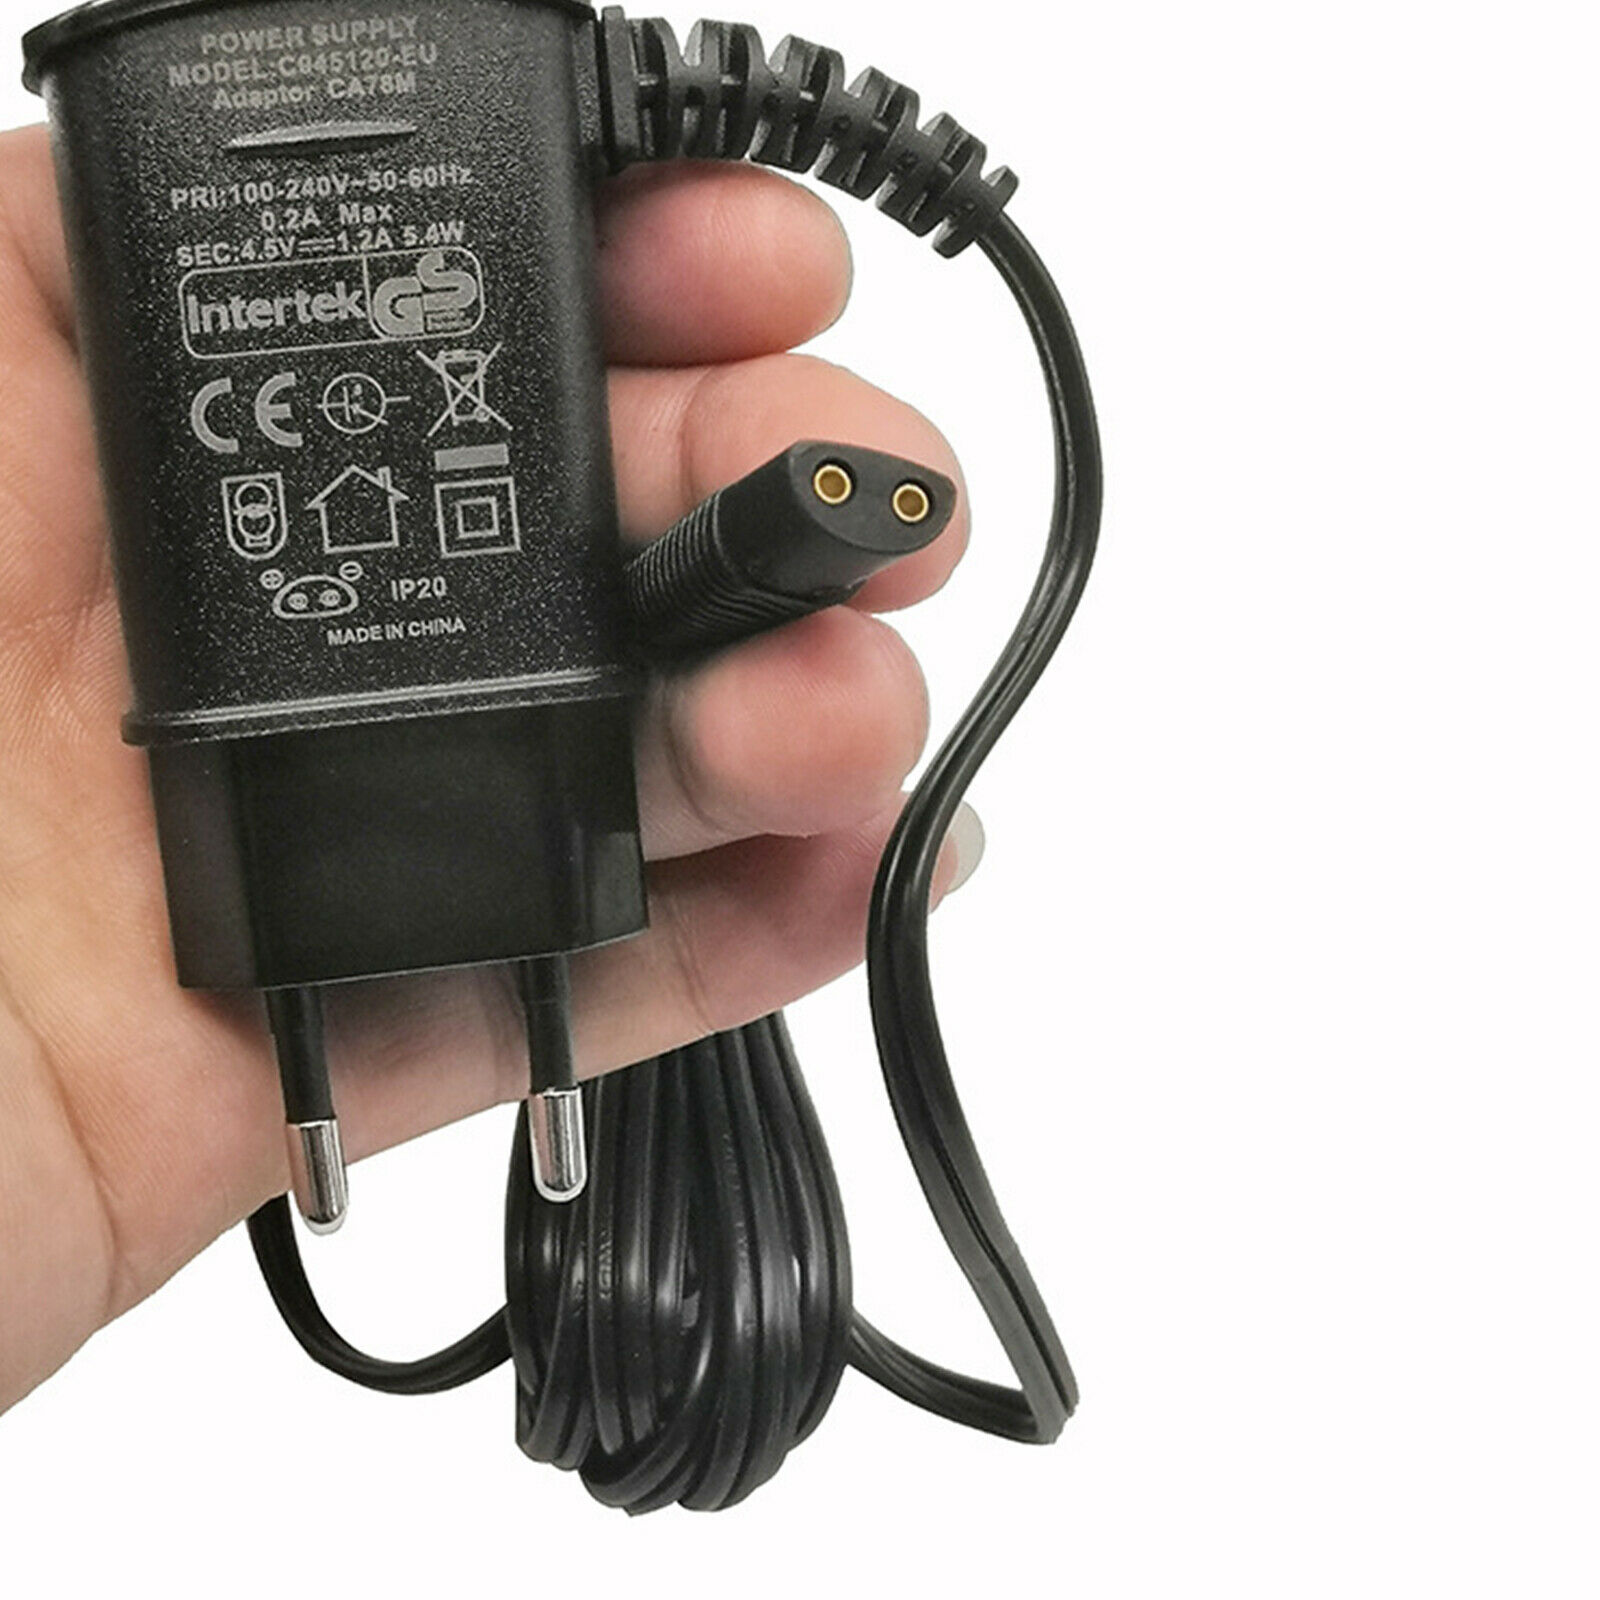 For Babyliss Pro Shaver Power Supply EU-Plug Power Adapter Shaver Razor Charger Brand: Unbranded Color: Black Countr - Click Image to Close